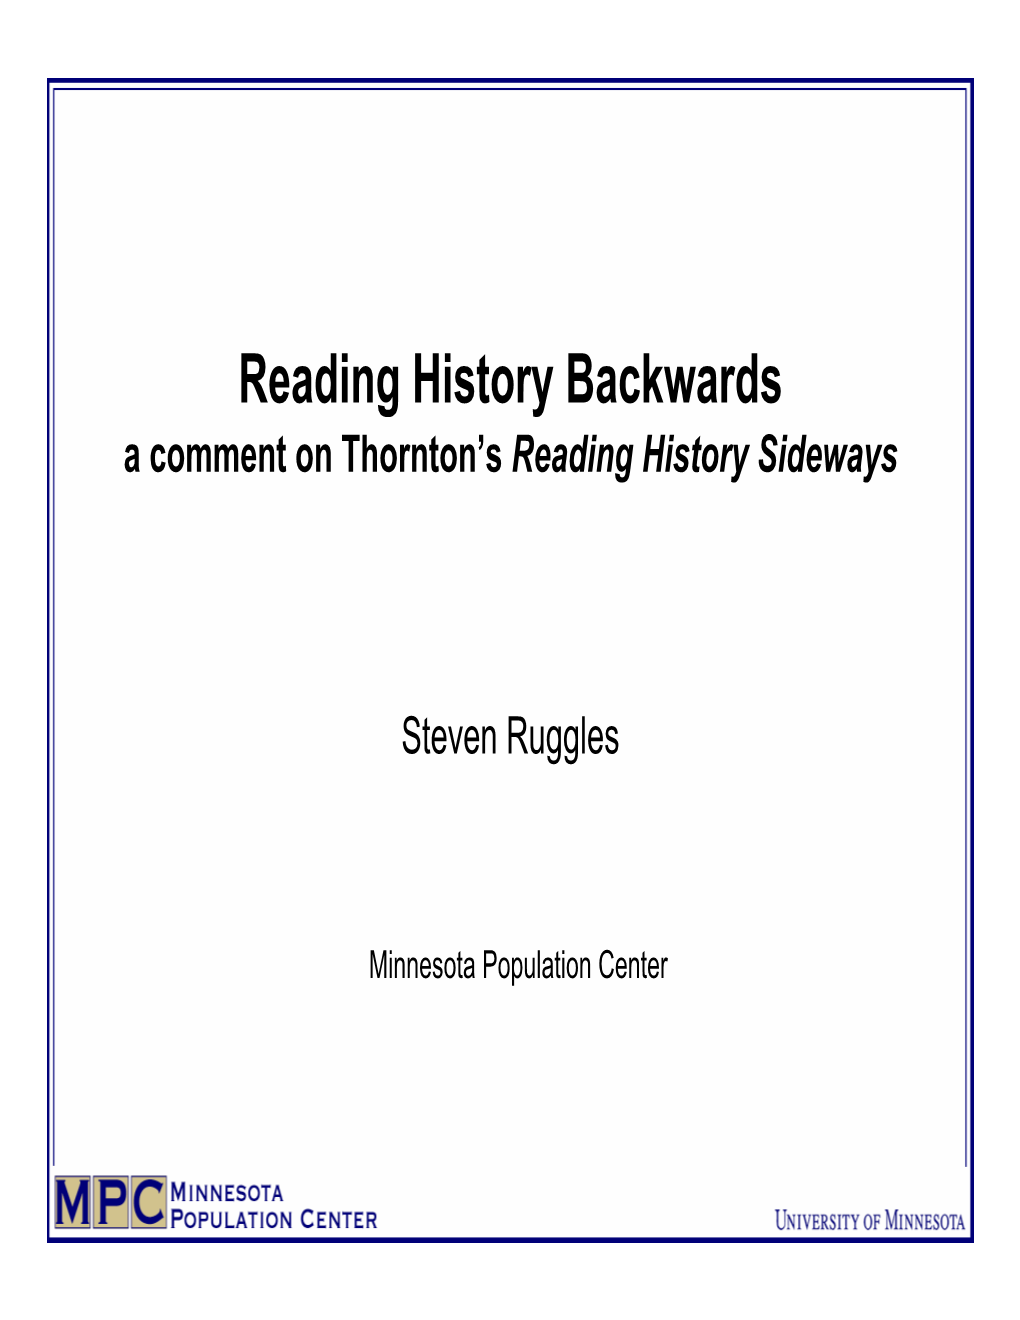 Reading History Backwards a Comment on Thornton’S Reading History Sideways